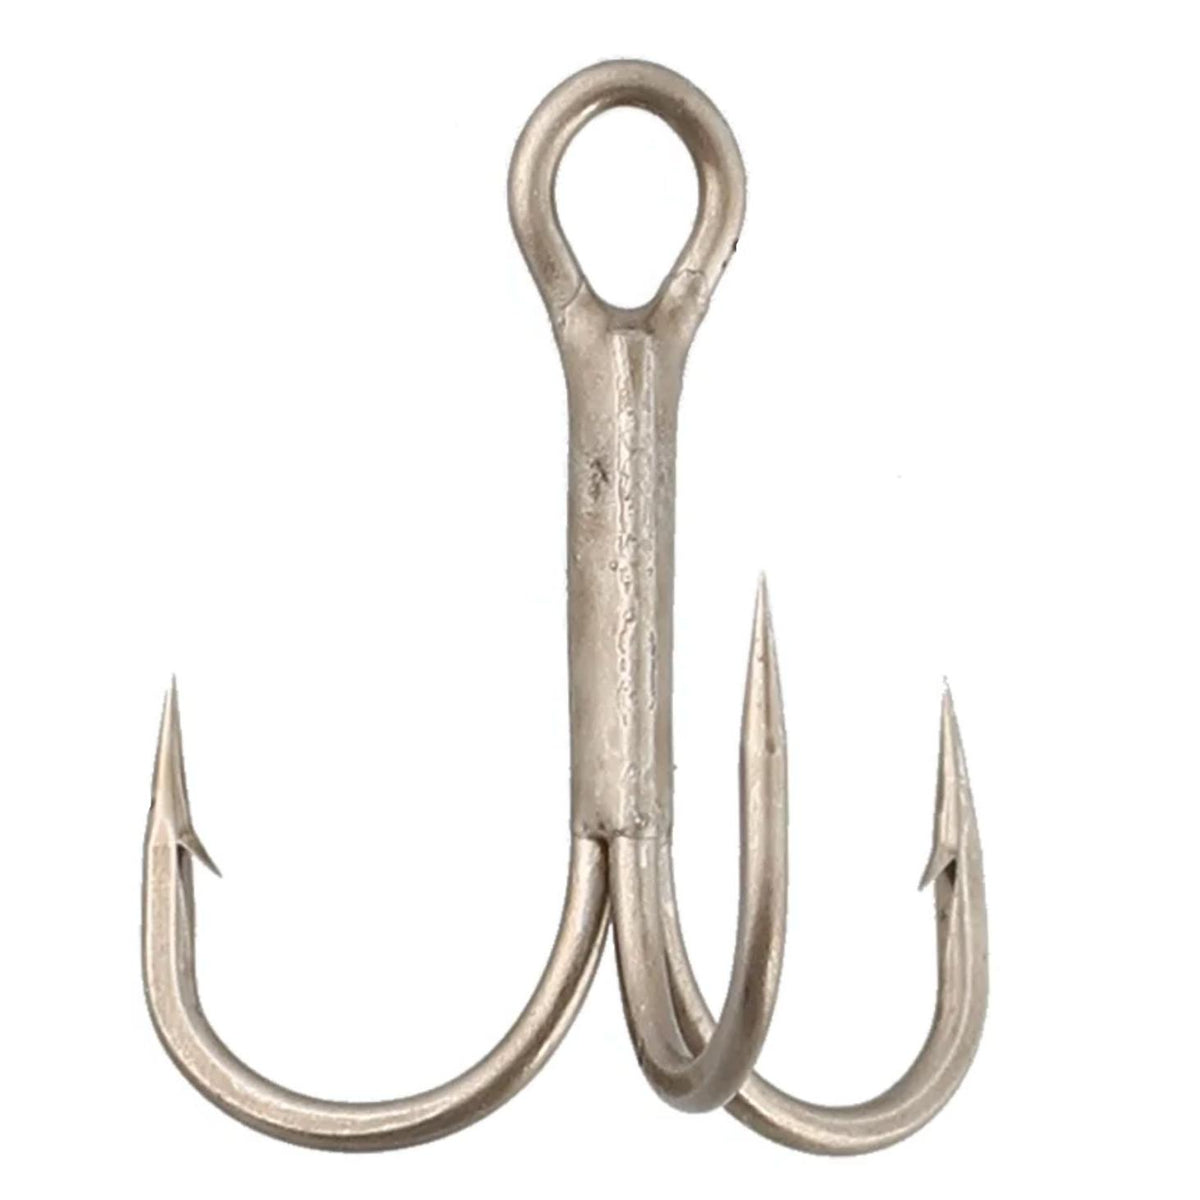 Hurricane Chesterton Flounder Hooks with 12 Leader, C Town, Size 9, 6 Pack